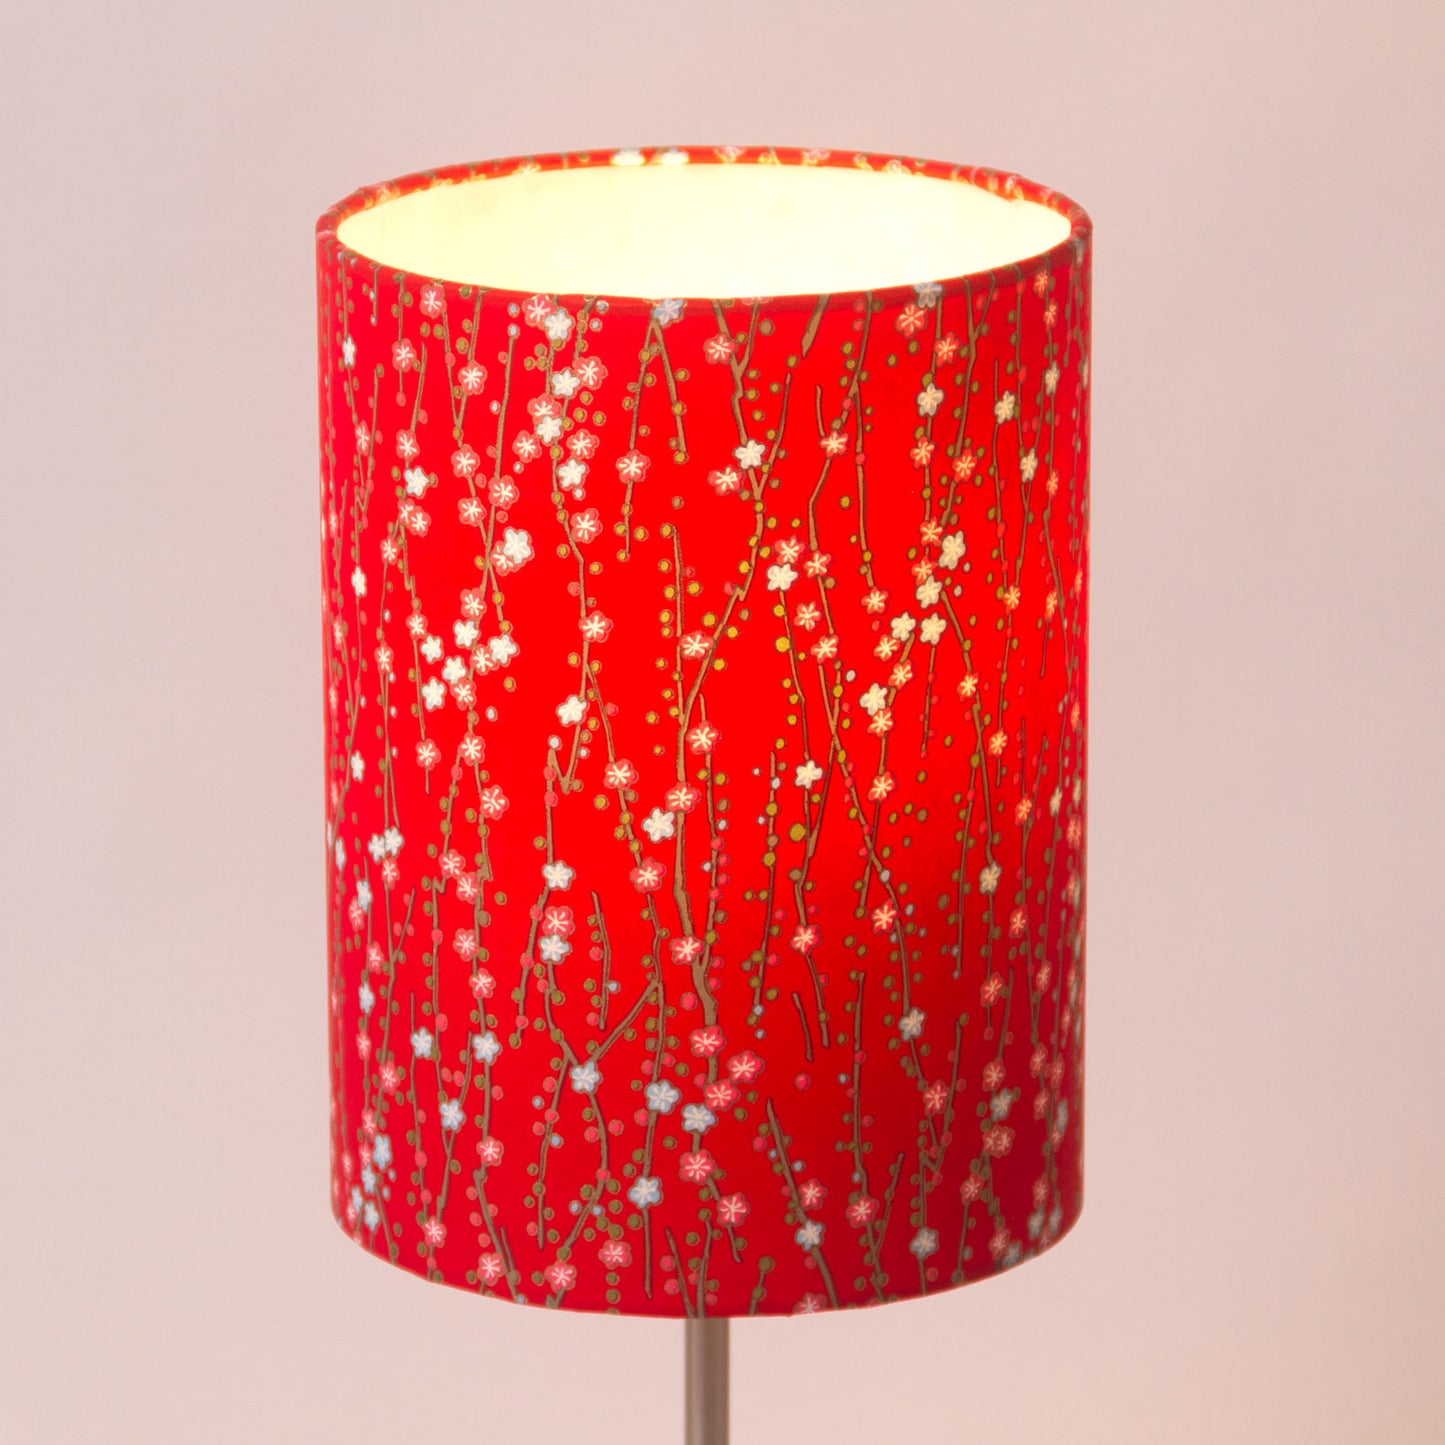 Square Lamp Shade - W01 ~ Red Daisies, 40cm(w) x 20cm(h) x 40cm(d)